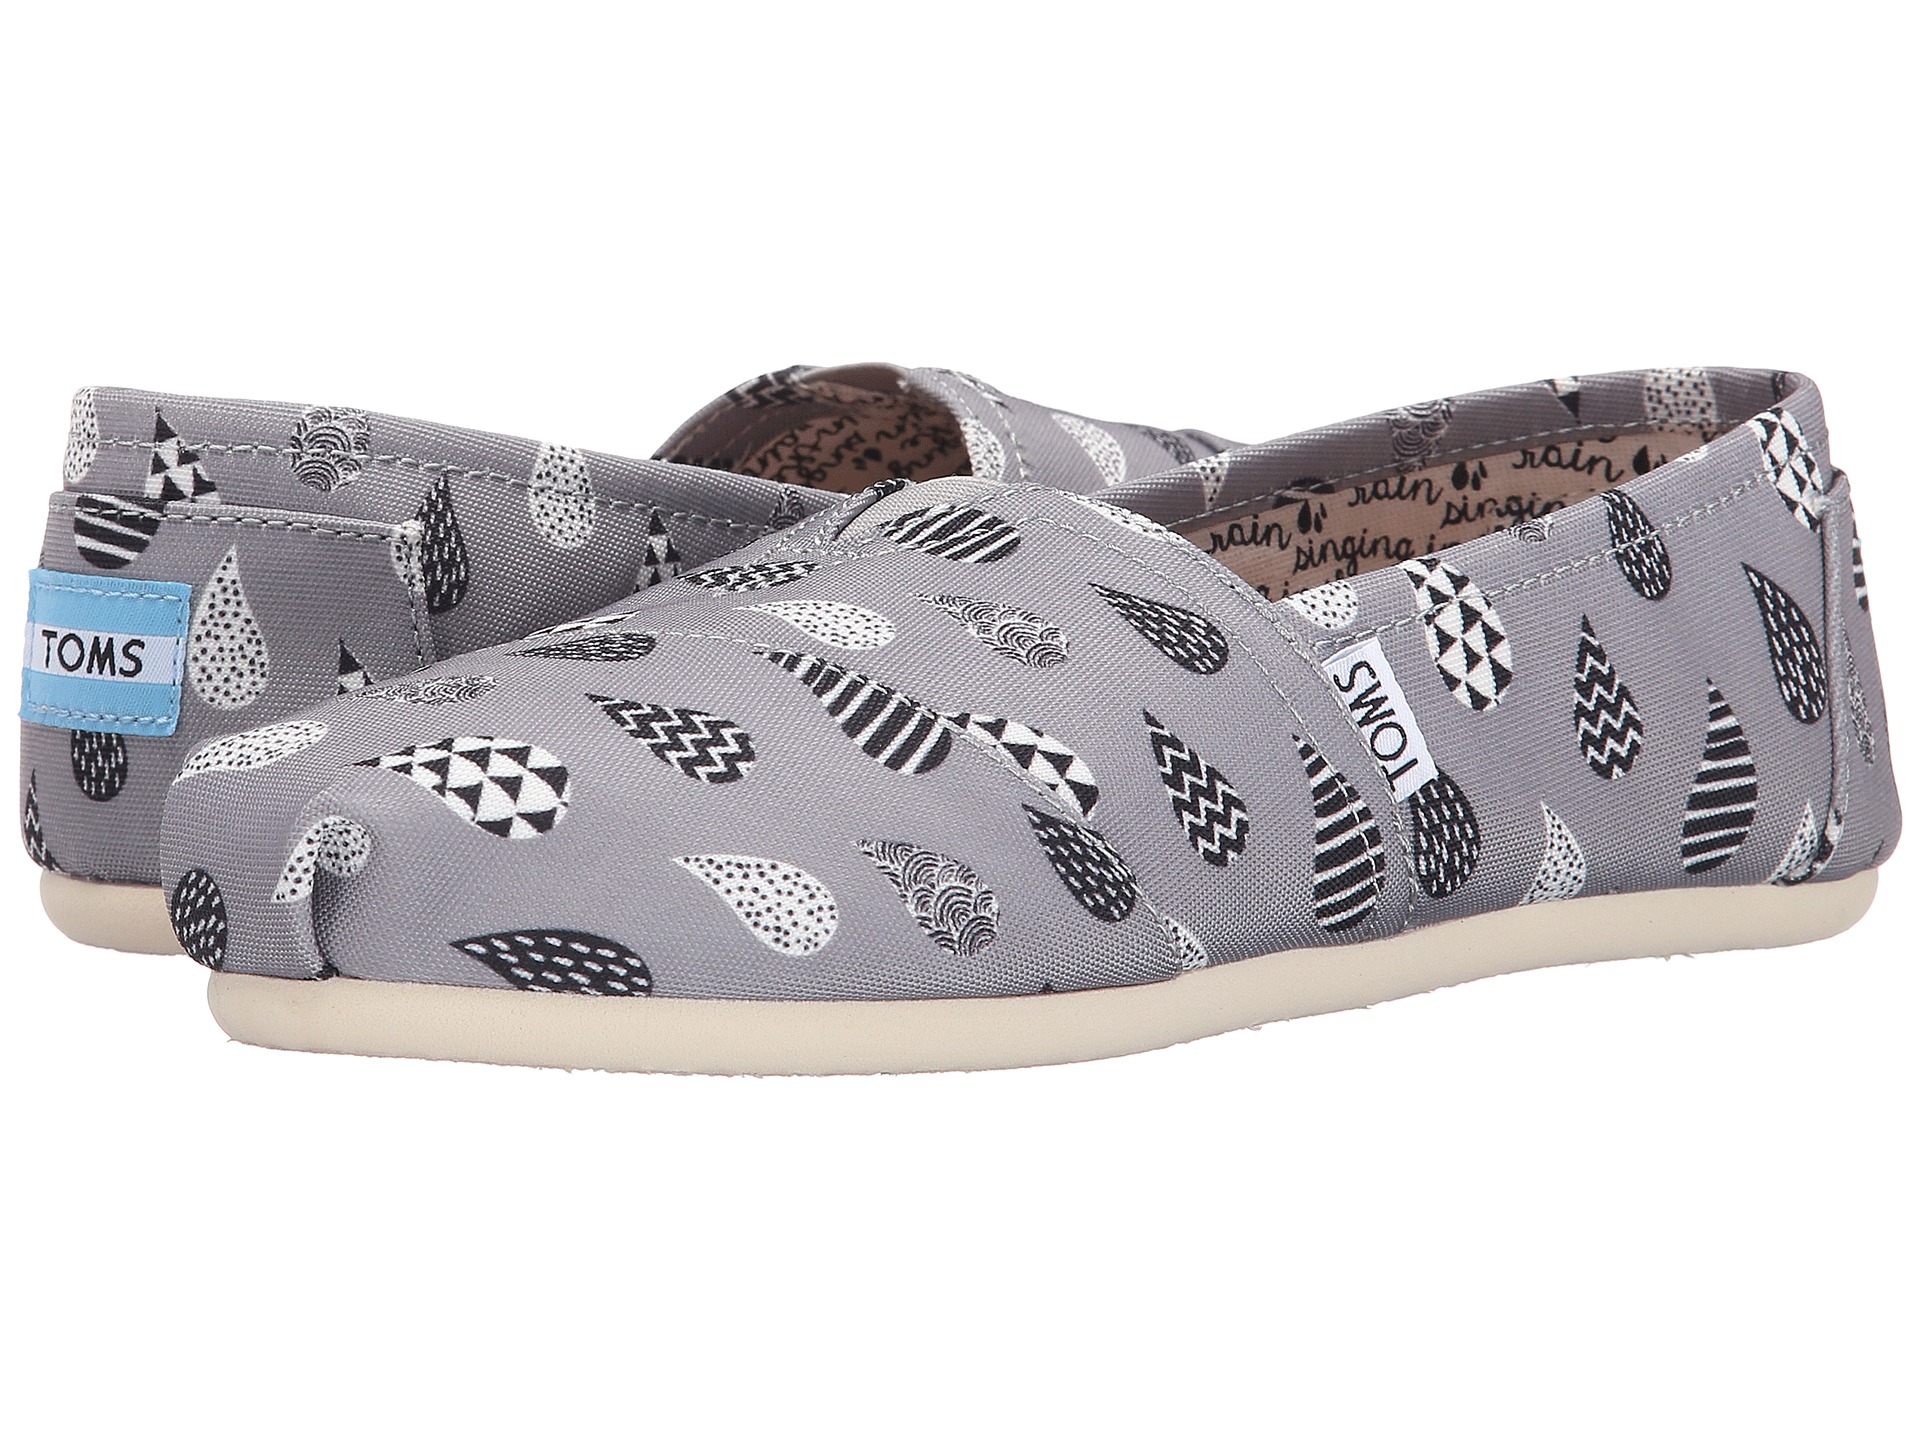 Toms Shoes – As Low As $27.00! Free shipping! New styles added!